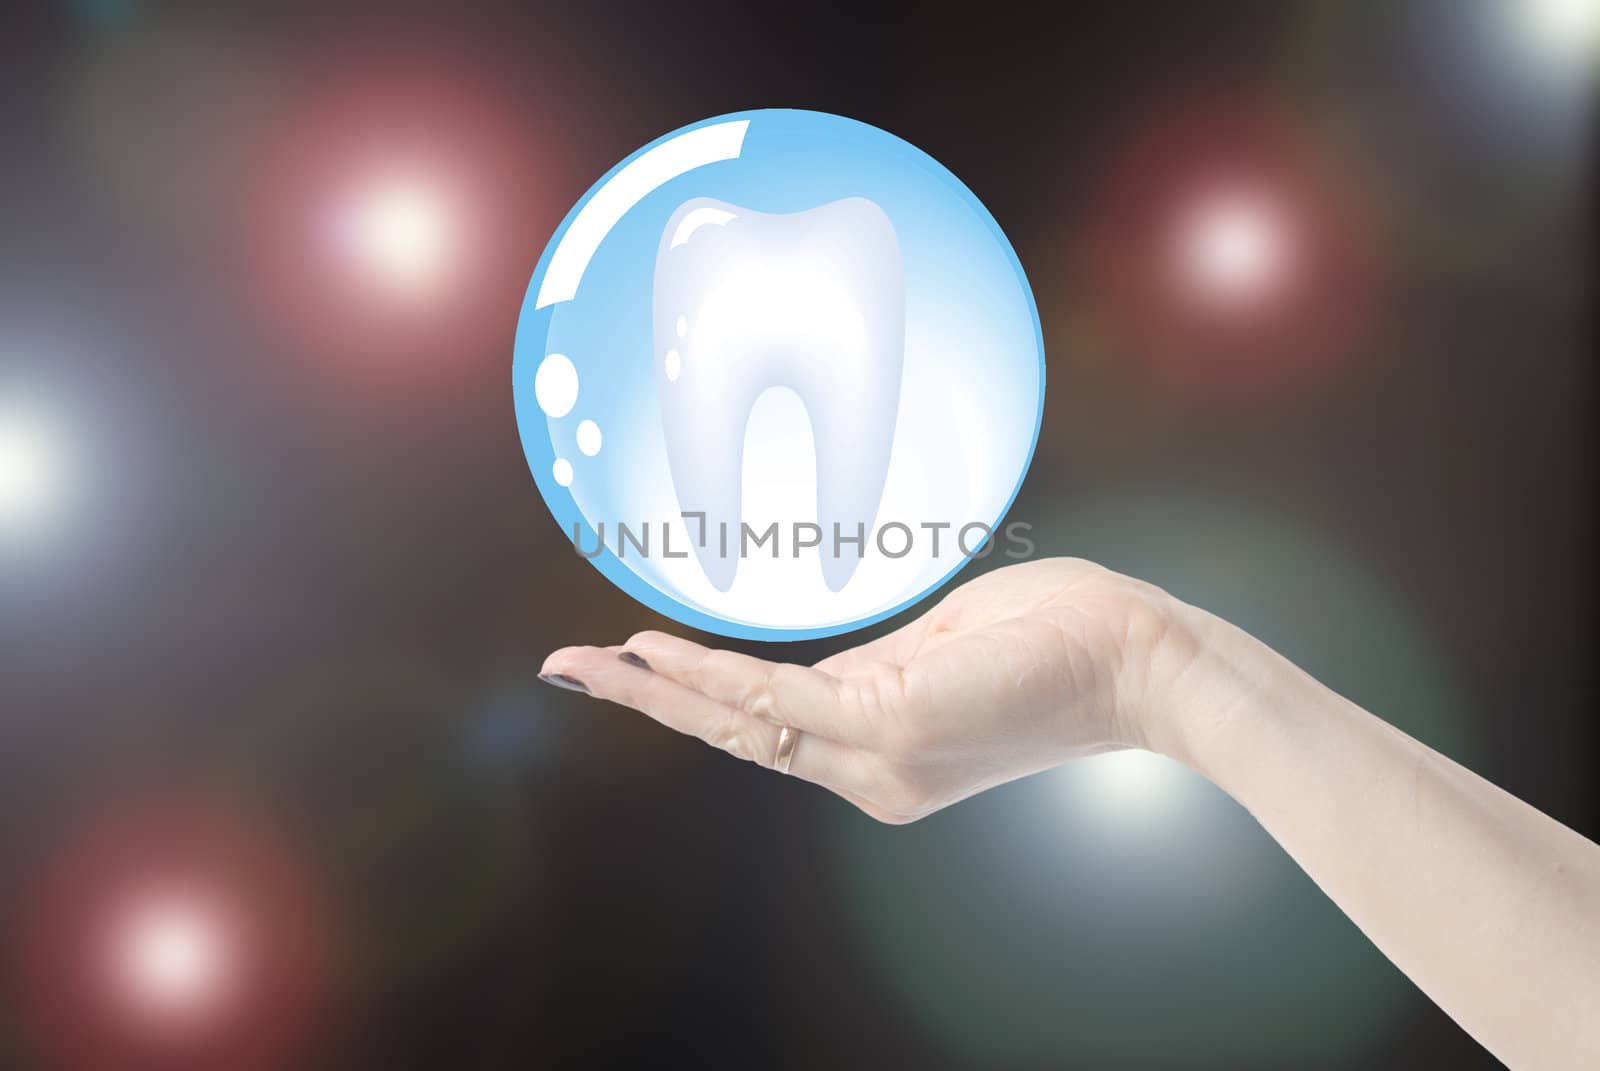 hands holding tooth in glass sphere, dentistry  